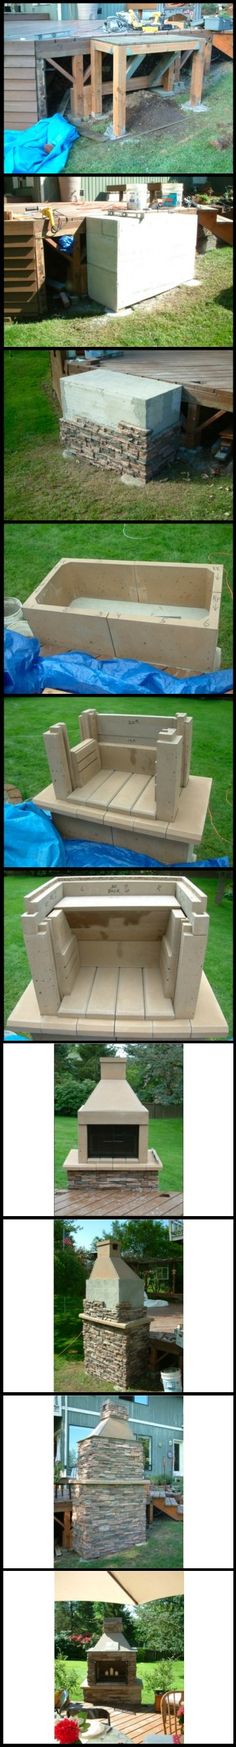 Outdoor Fireplace Box Awesome 64 Best Outdoor Fireplace Kits Images